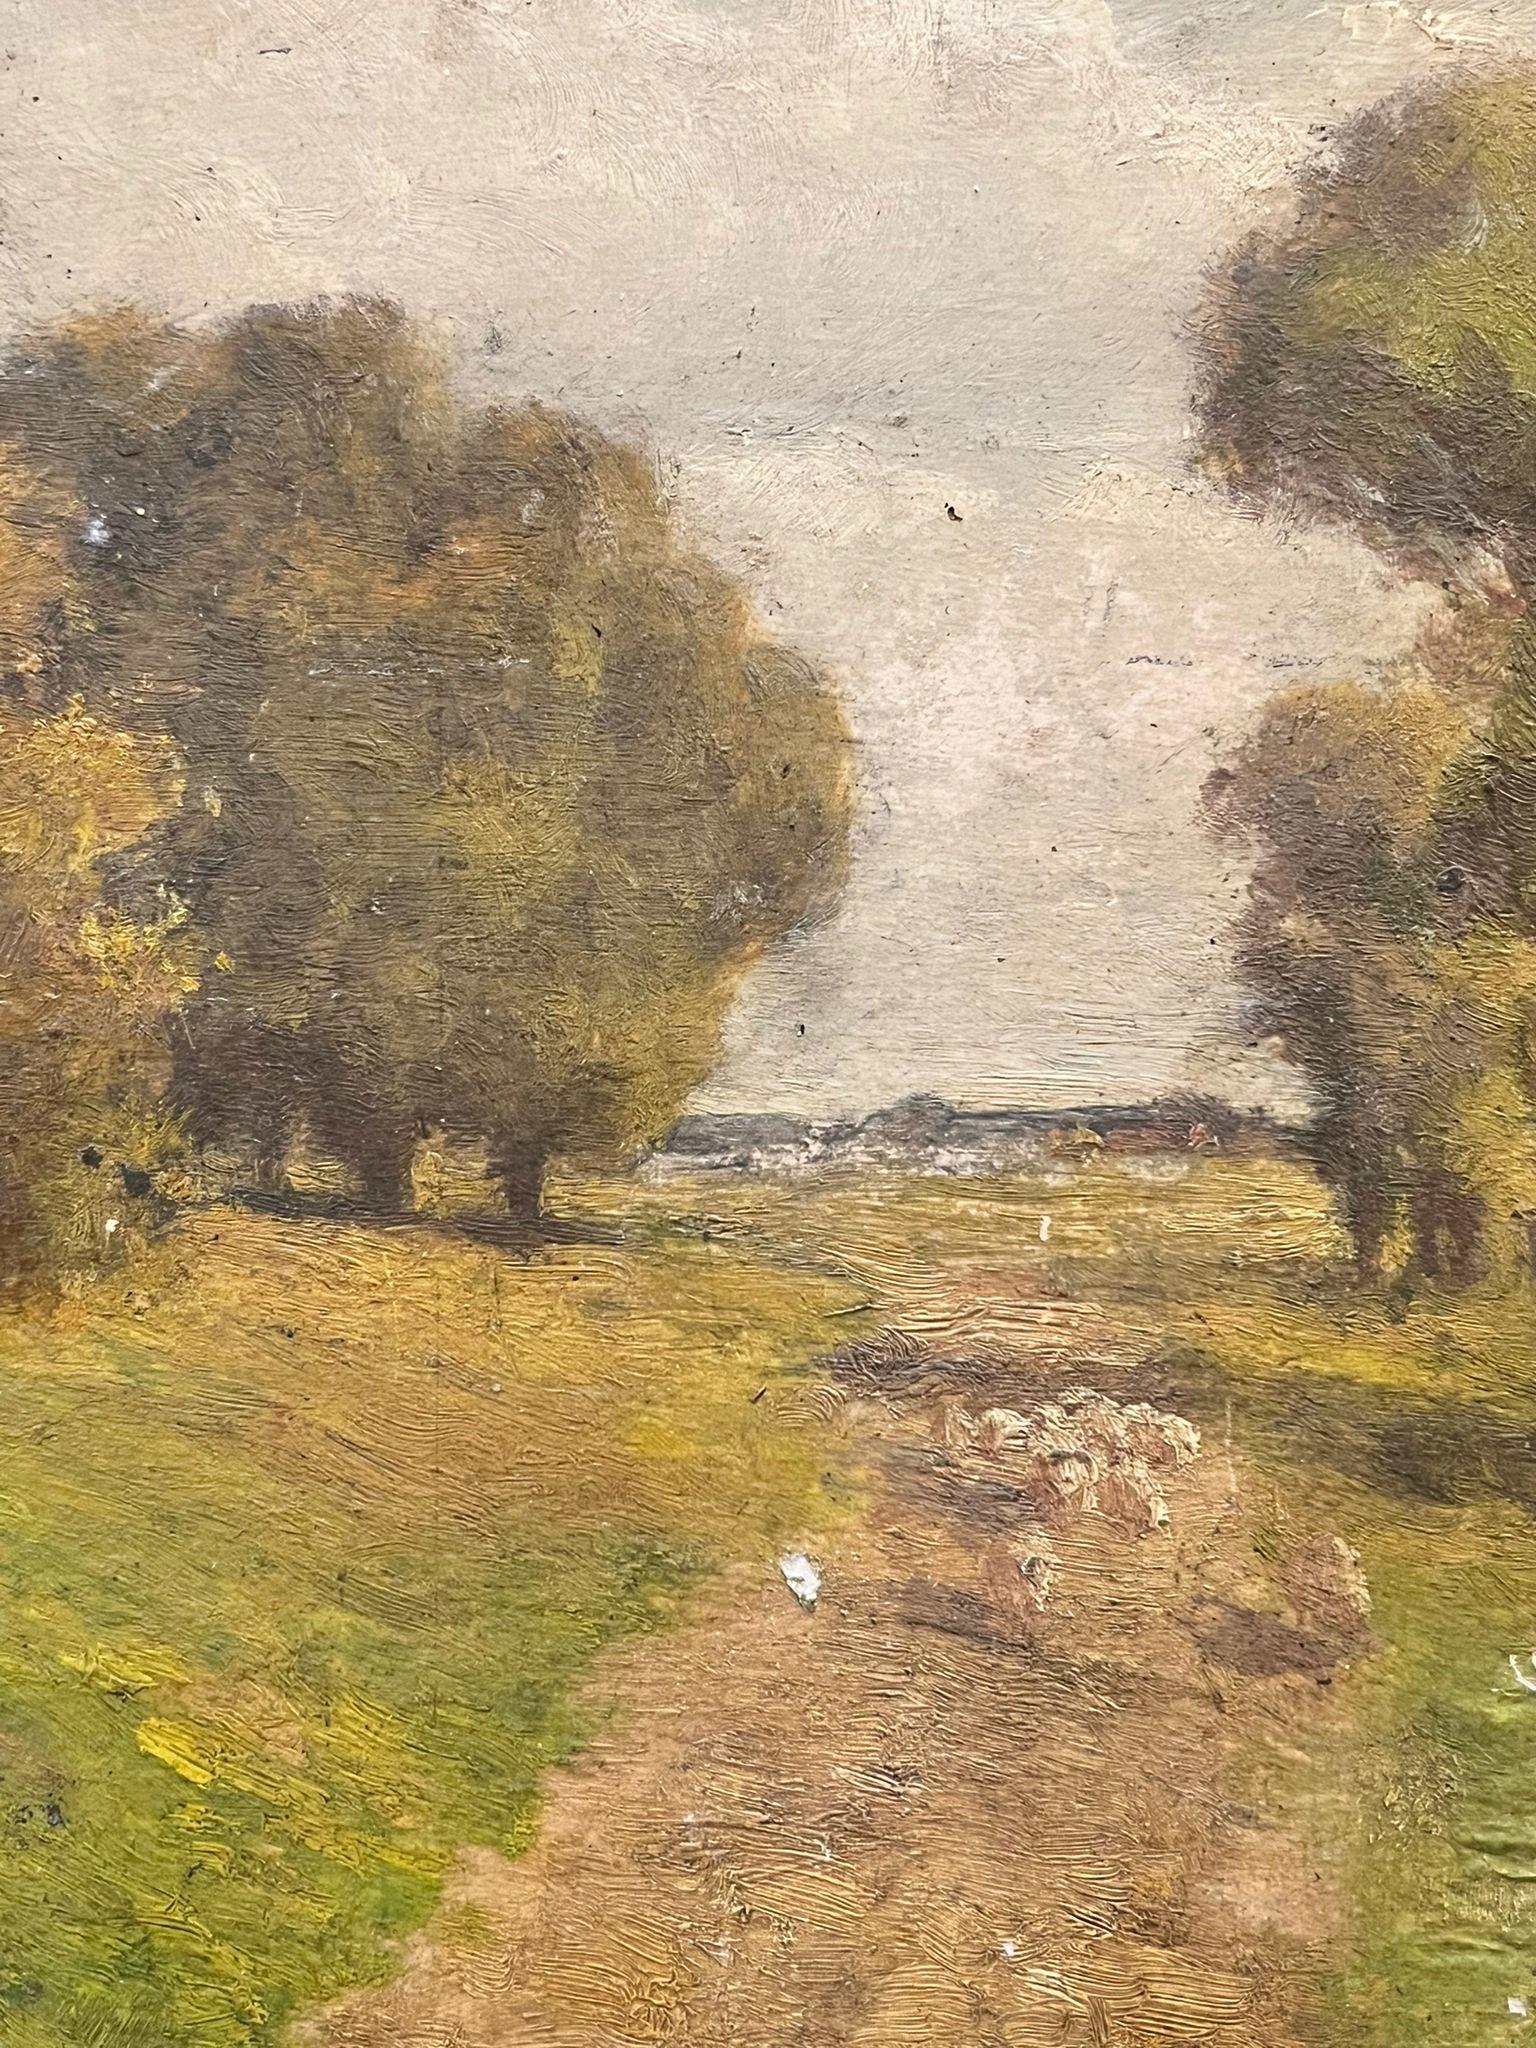 Artist/ School: English School, late 19th/ early 20th century.
The painting came from a large collection of works by one artist. A very few of them are signed what looks to be 'F. Wardle'. 

Title: Sheep In Path

Medium: oil on board,